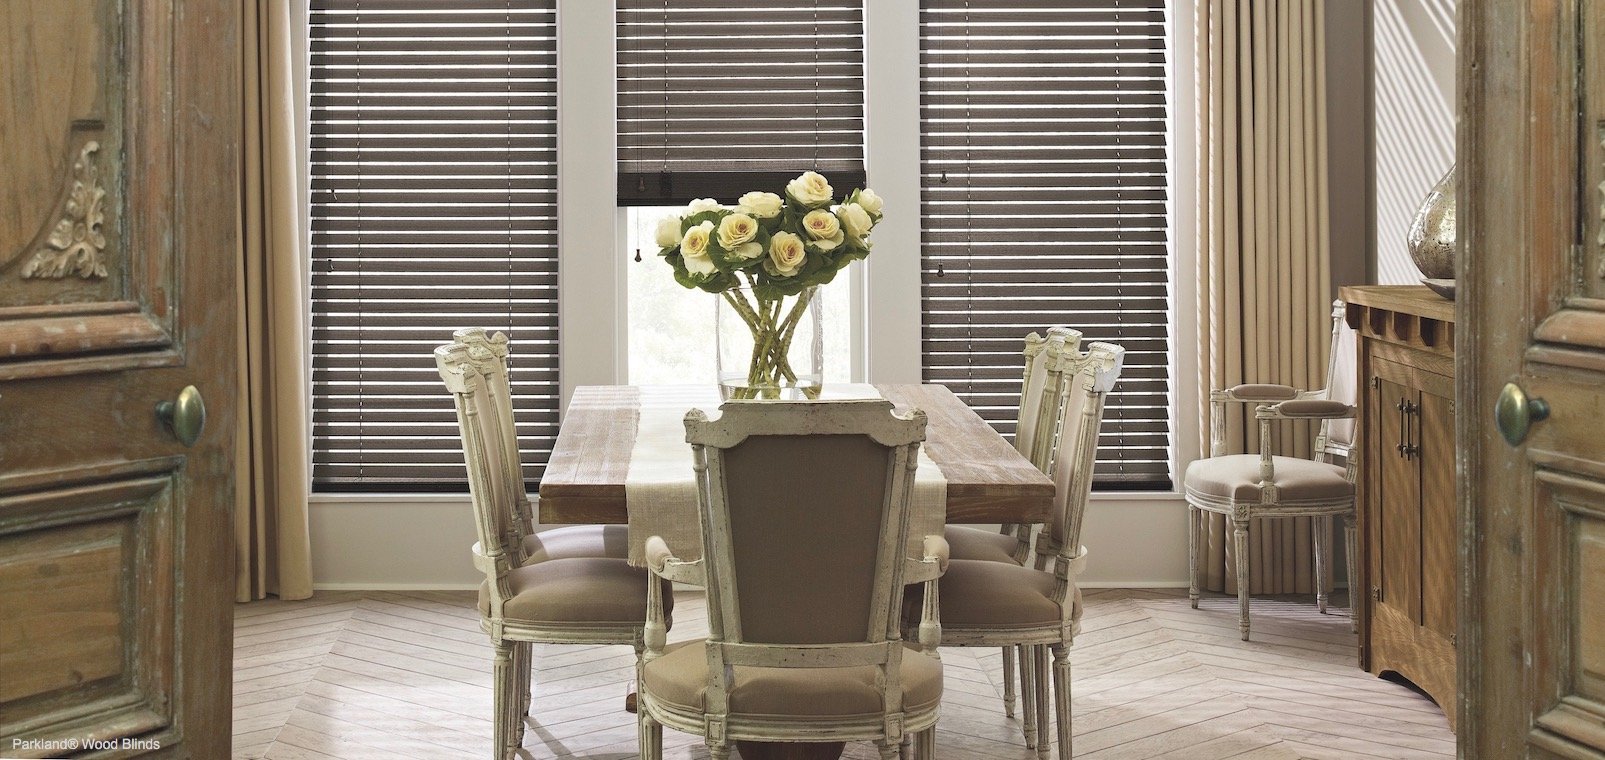 Natural Wood Decoration With Window Treatments